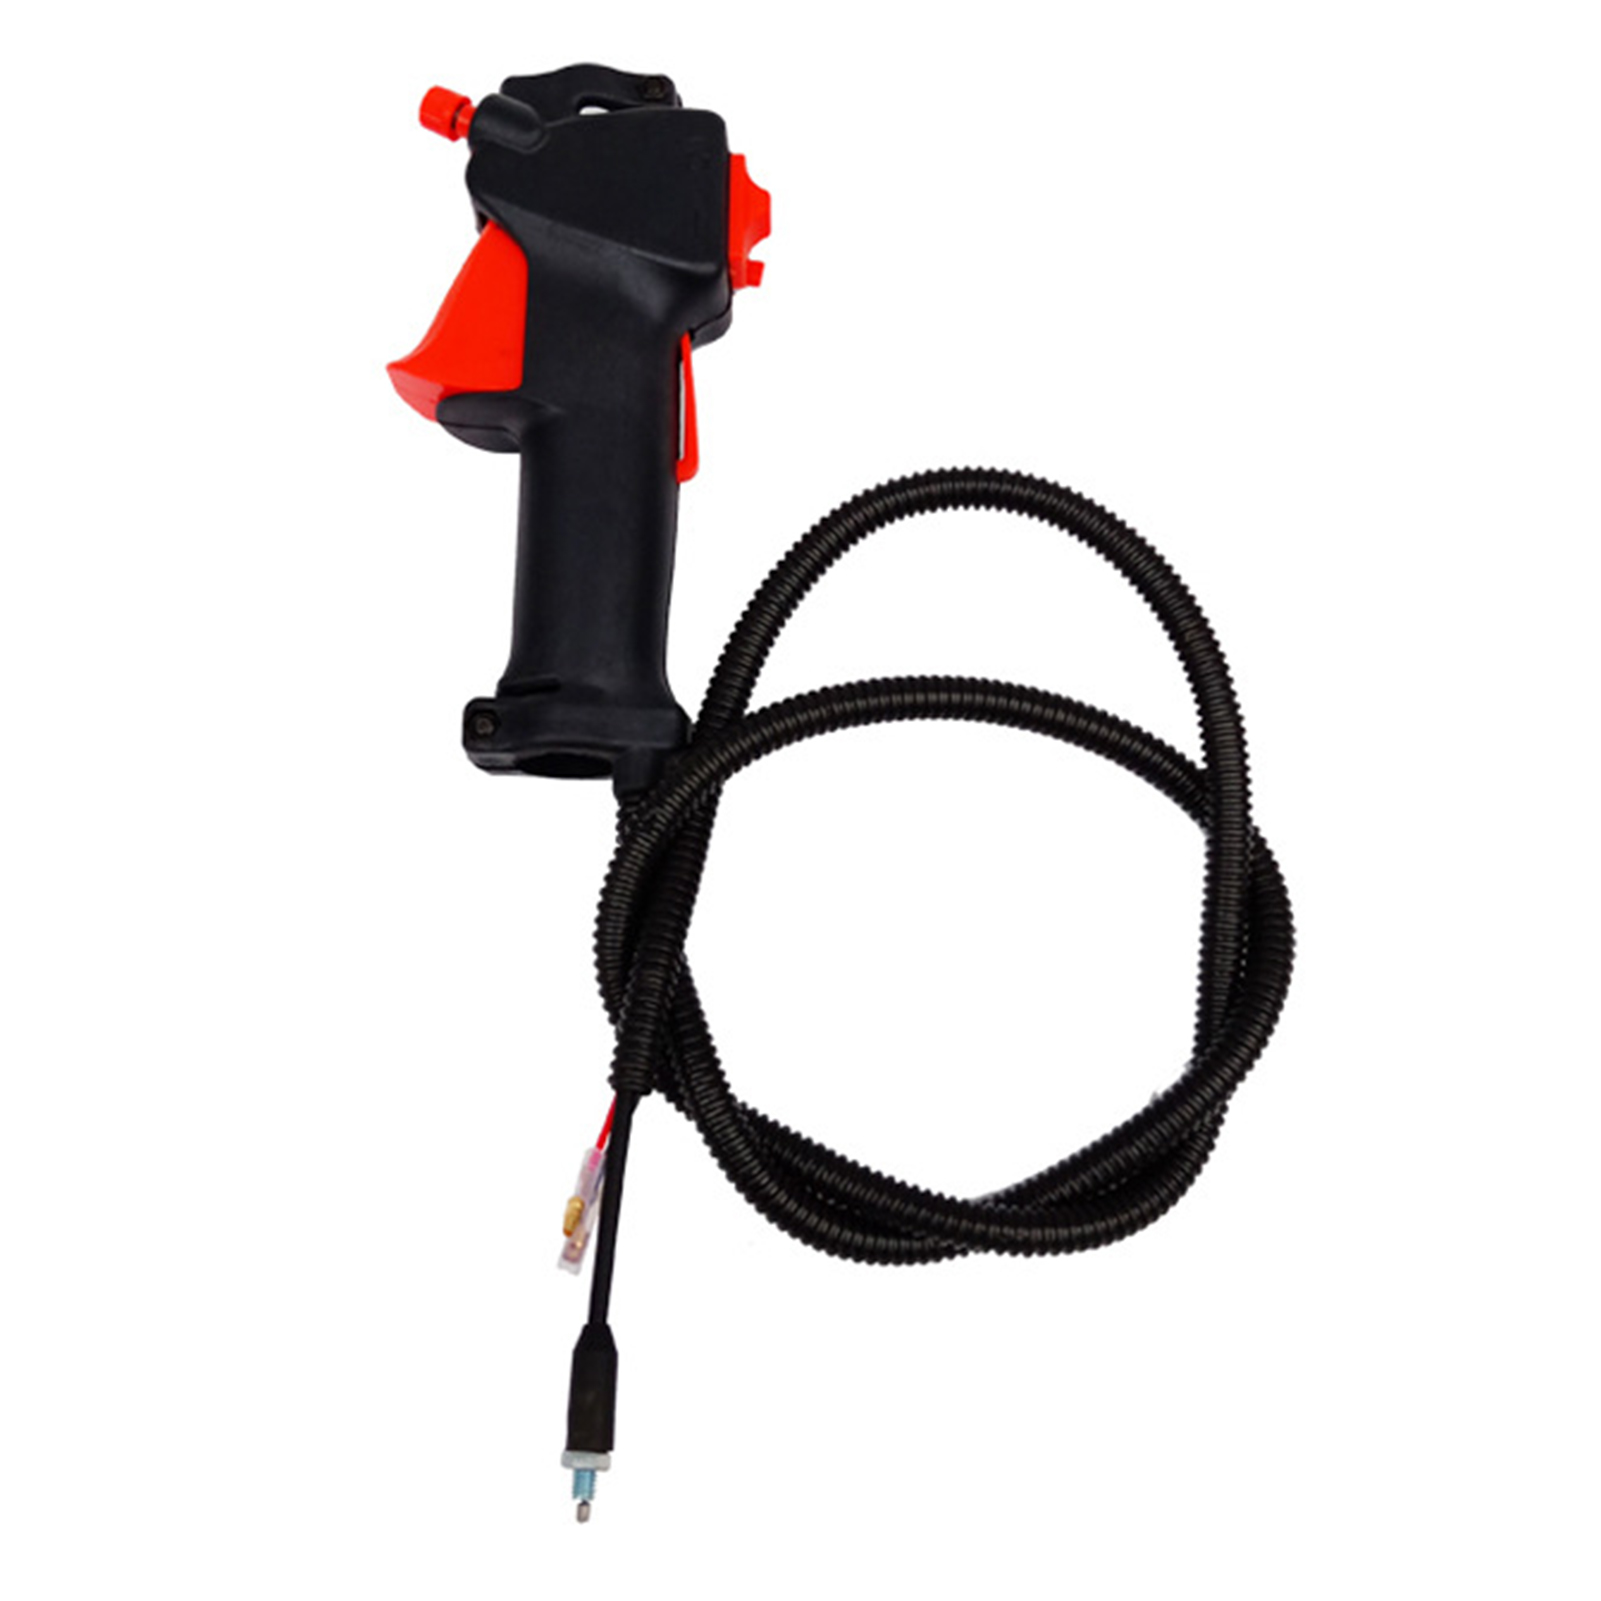 26mm Trimmer Strimmer Brushcutter Handle Switch Throttle Trigger Cable